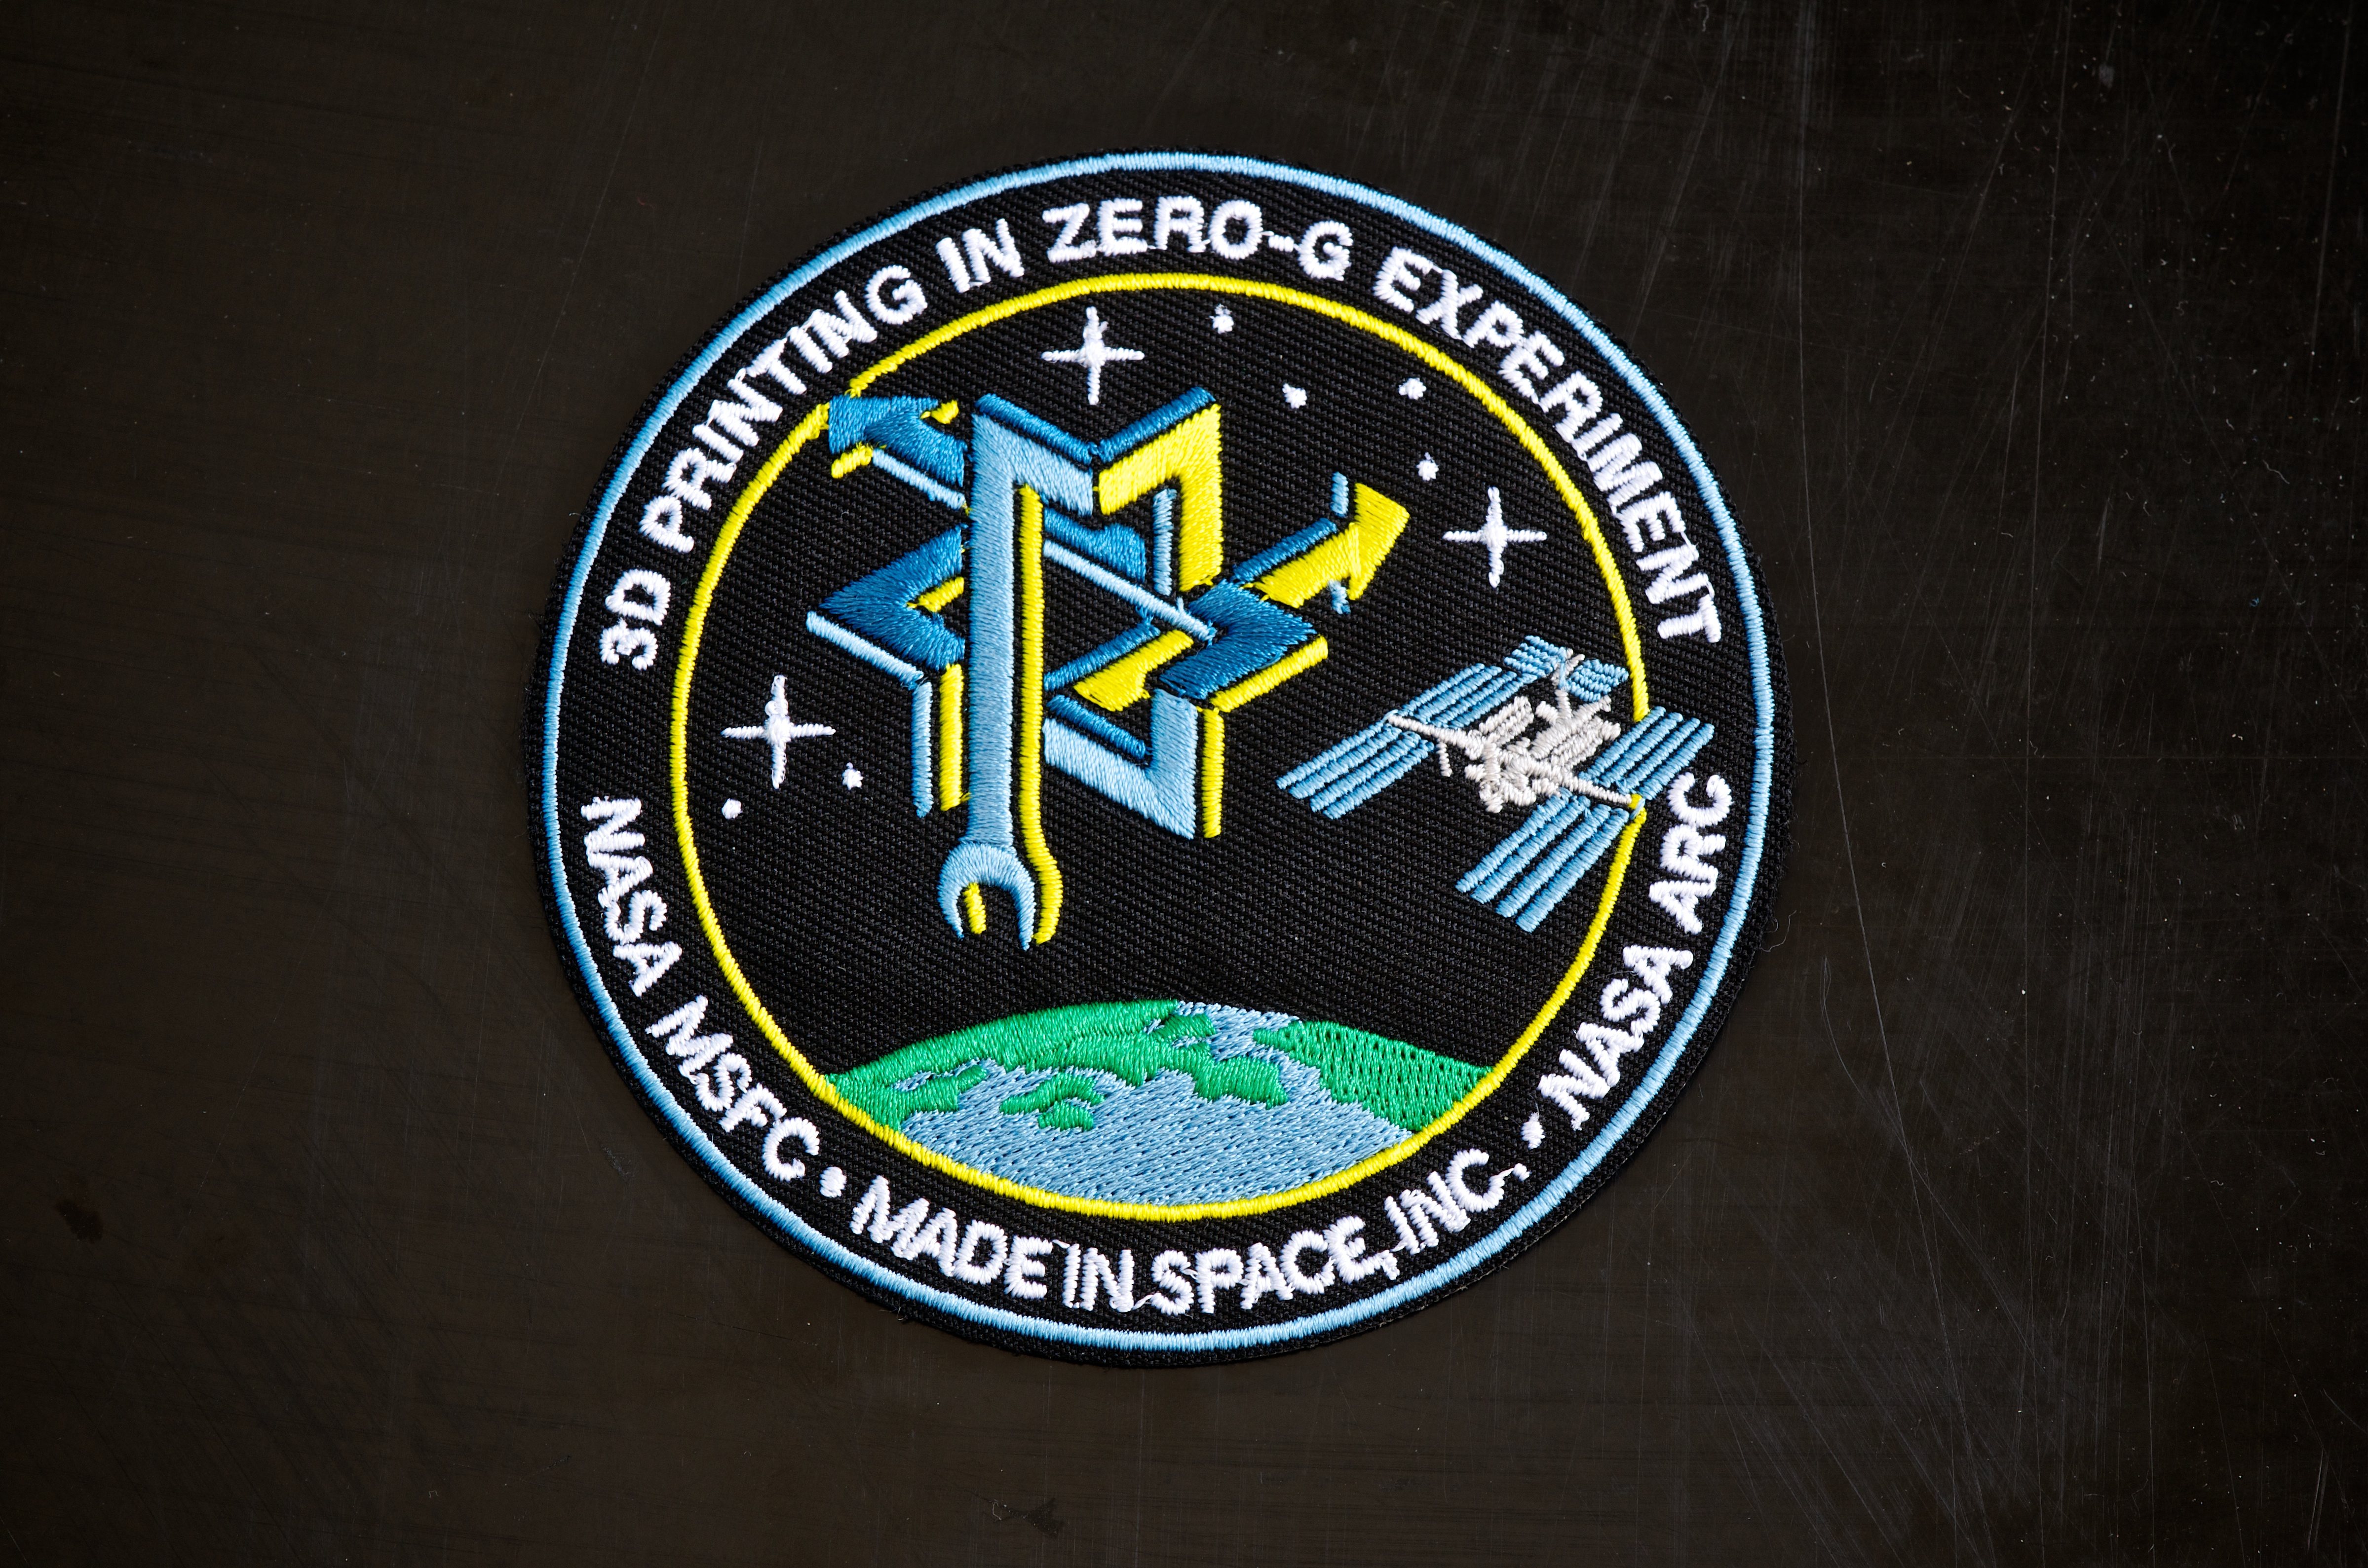 The 3D Printing in Zero-G Experiment mission patch symbolizes the partnership between Made In Space and NASA in bringing Additive Manufacturing to space.